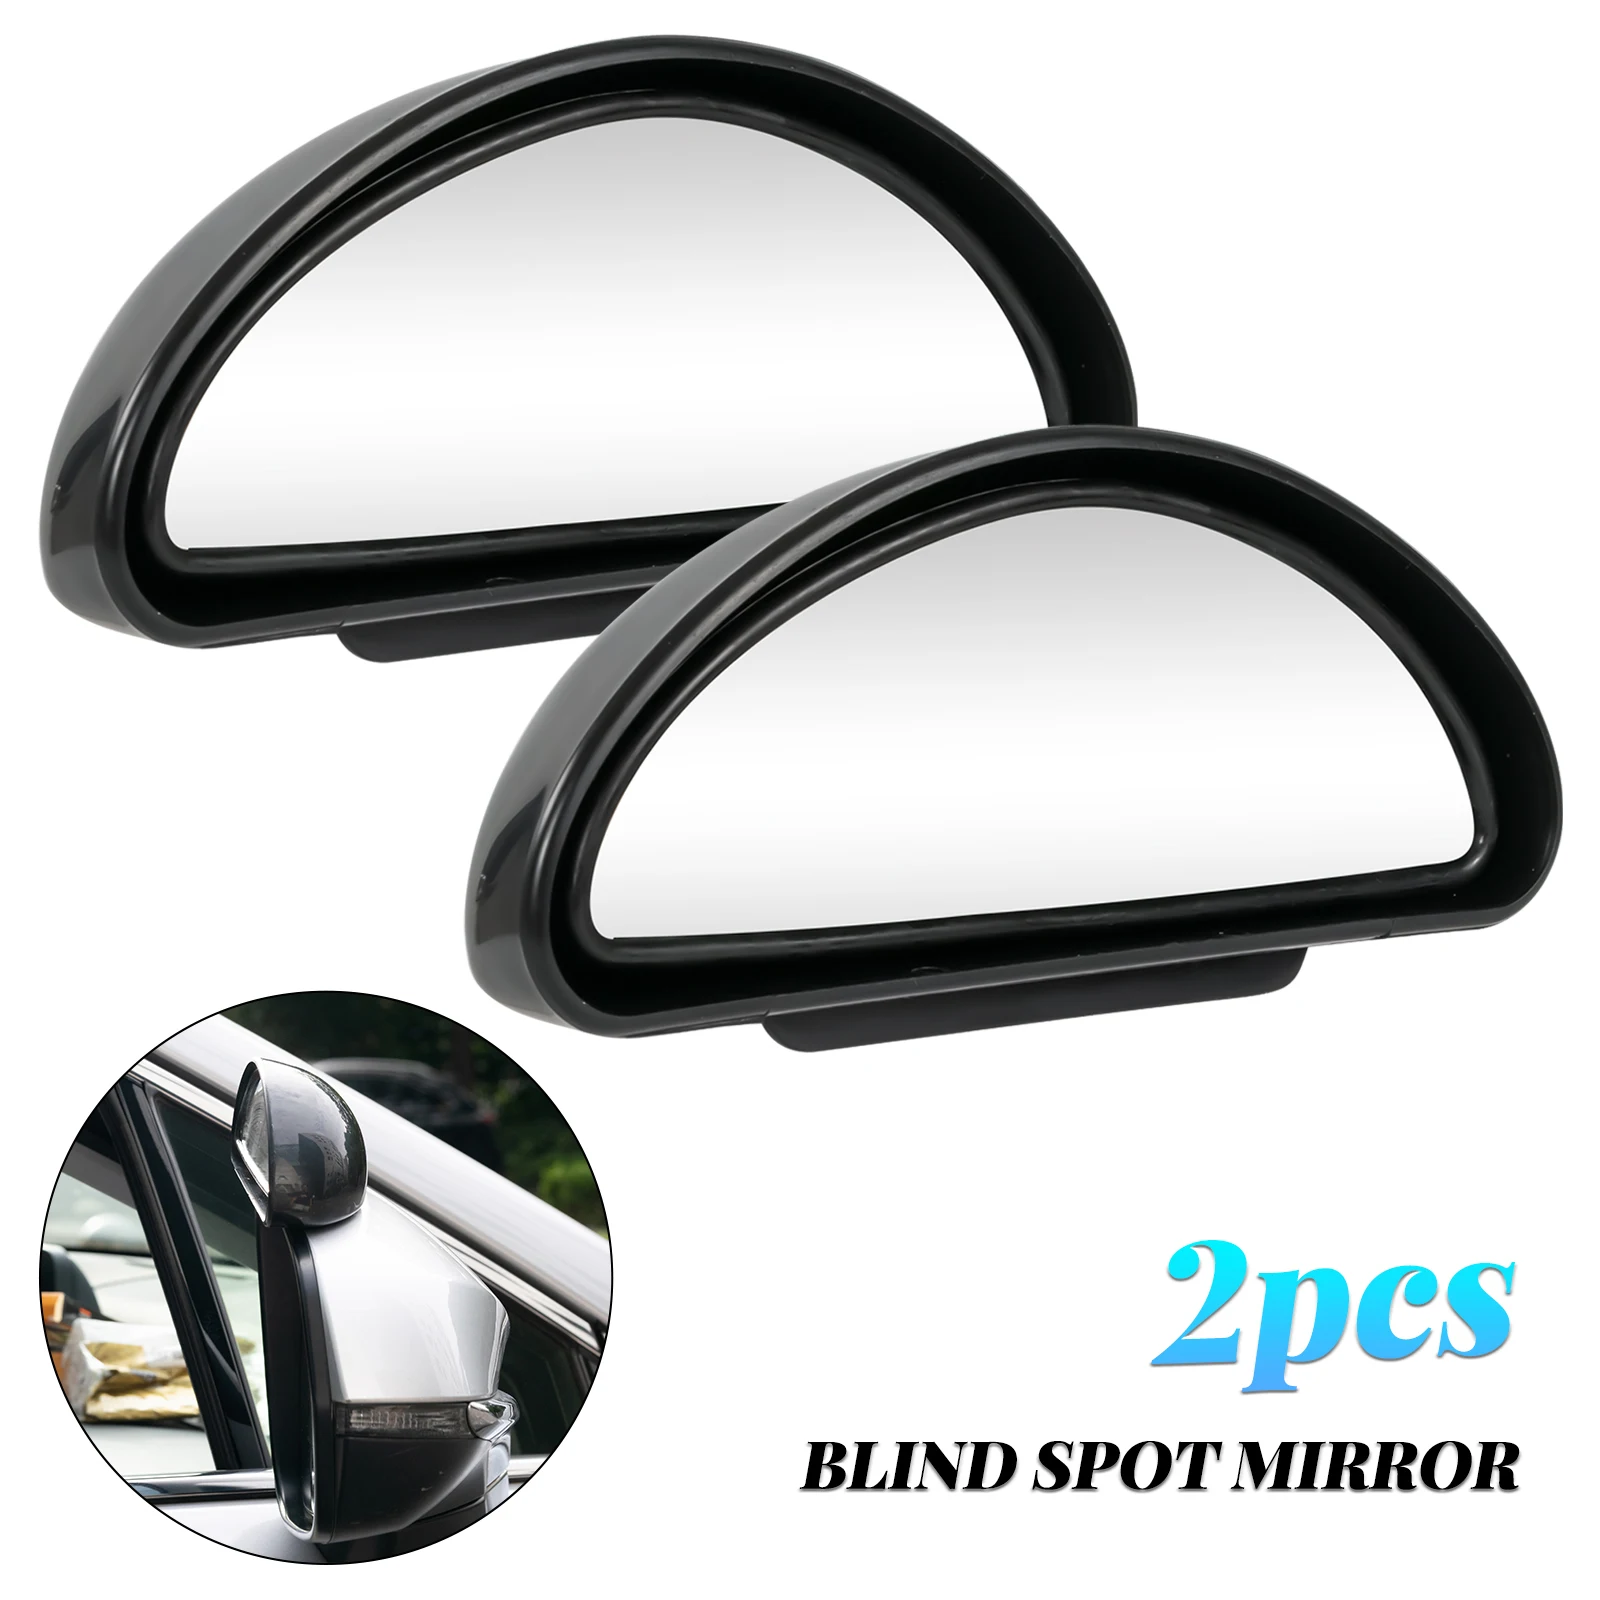 2 Car Blind Spot Mirror Adjustable Rear View Mirror 360 Degree Reverse Wide Angle Additional Mirror for Parking Auxiliary Mirror